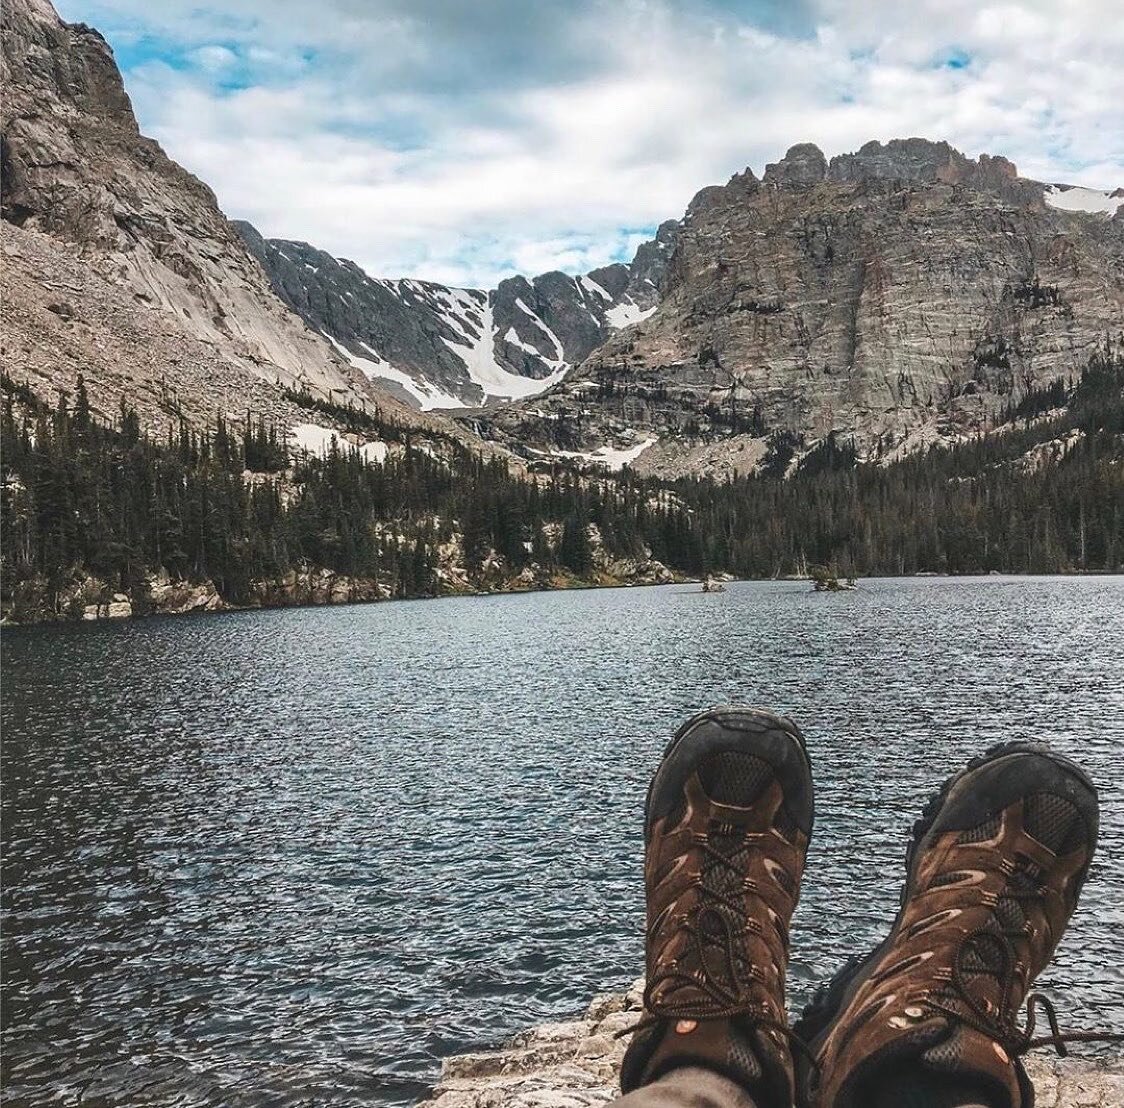 There are always peaceful moments to find in Estes Park! 🏔

Book at Coyote Mountain Lodge for some adventure and relaxation! 

&bull;
&bull;
📸: @buckinghamsexplore 

#hikecolorado #coloradohiking #beautifuldestinations #mountainviews #nicehike #lak